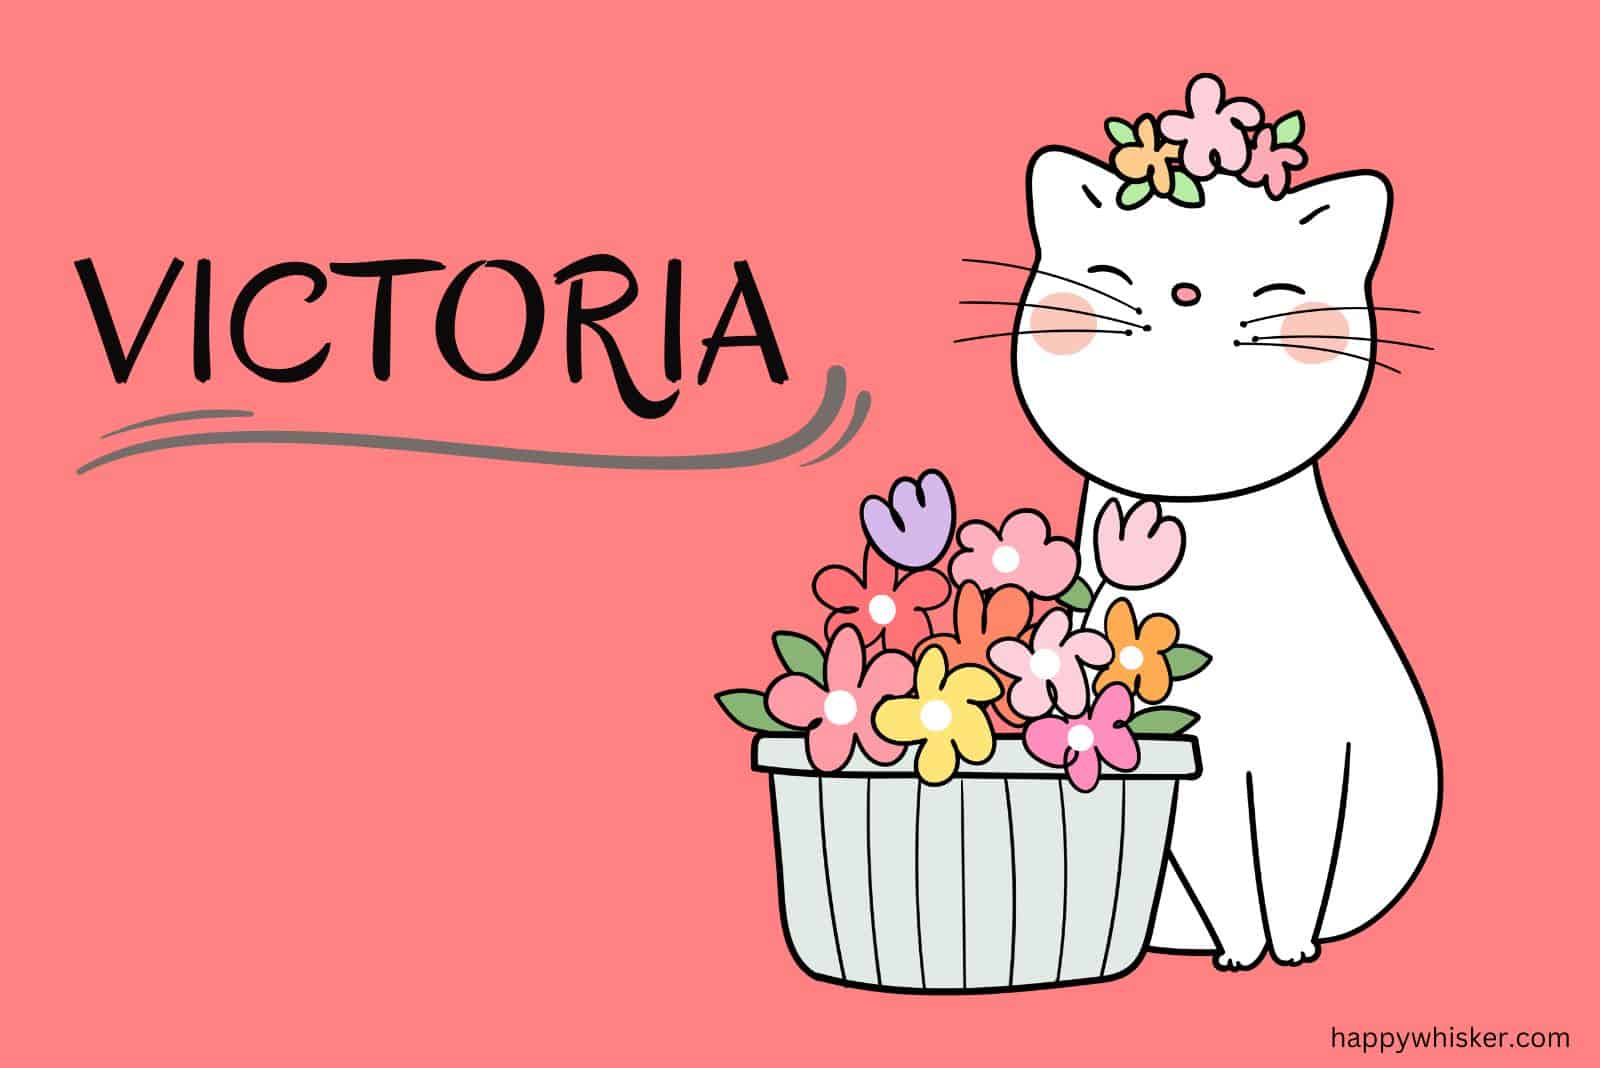 victoria name and white cat on pink background